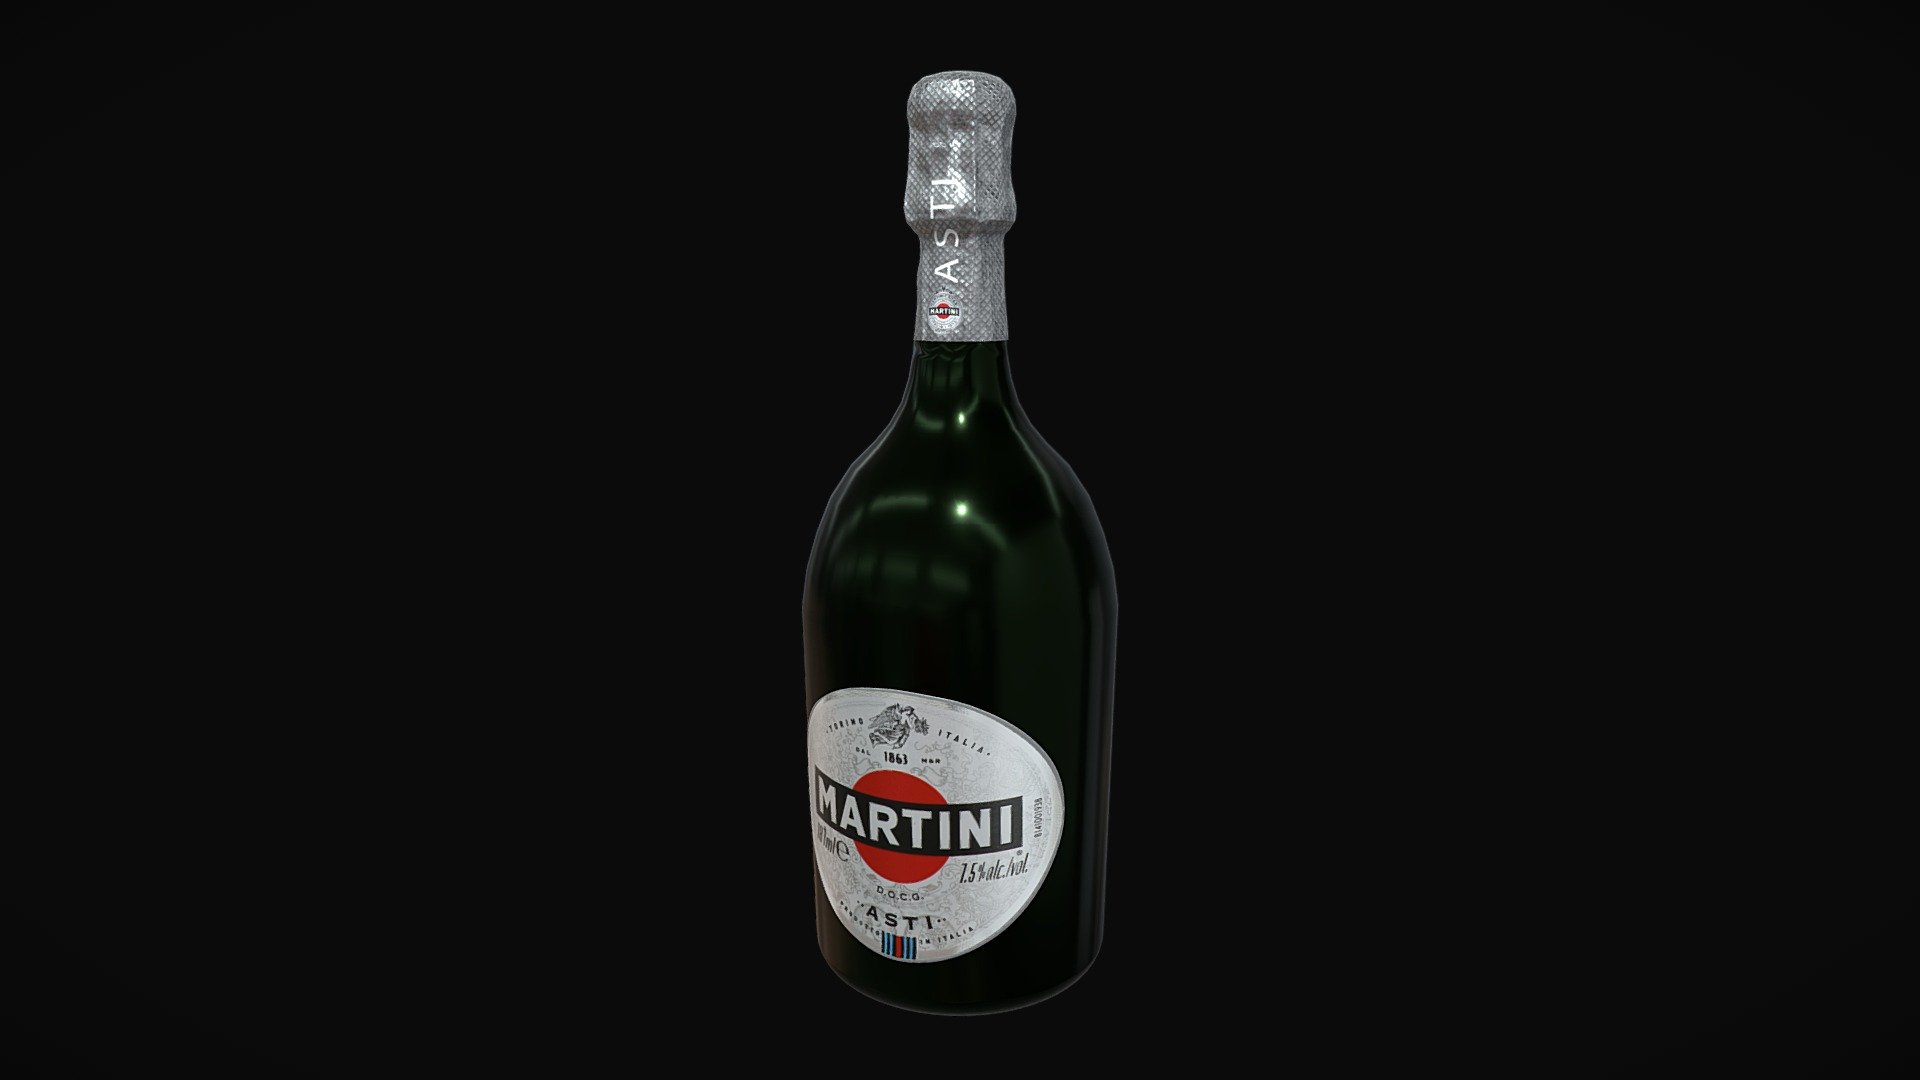 This is a mid poly model of Martini champagne. This model is perfect for anything from presentations to game dev. Textures maps and UV data are included. There are three texture sets, each with texturemaps for metal/rough setup. The model is UV mapped and unwrapped with no overlapping UVs. The model has clean geometry and topology and has 5320 polys. This model was made in Maya and Substance.

PBR textures 4k .png / Base Color / AO / Normal / Roughnes / Metallic

Note: The product comes without scene, camera or lights, include only 3dmodel.

File formats available on request:

FBX Maya Blender OBJ Cinema4D STL

If you have any questions feel free to message me! Hope you like it! Also check out my other models, just click on my user name to see complete gallery 3d model